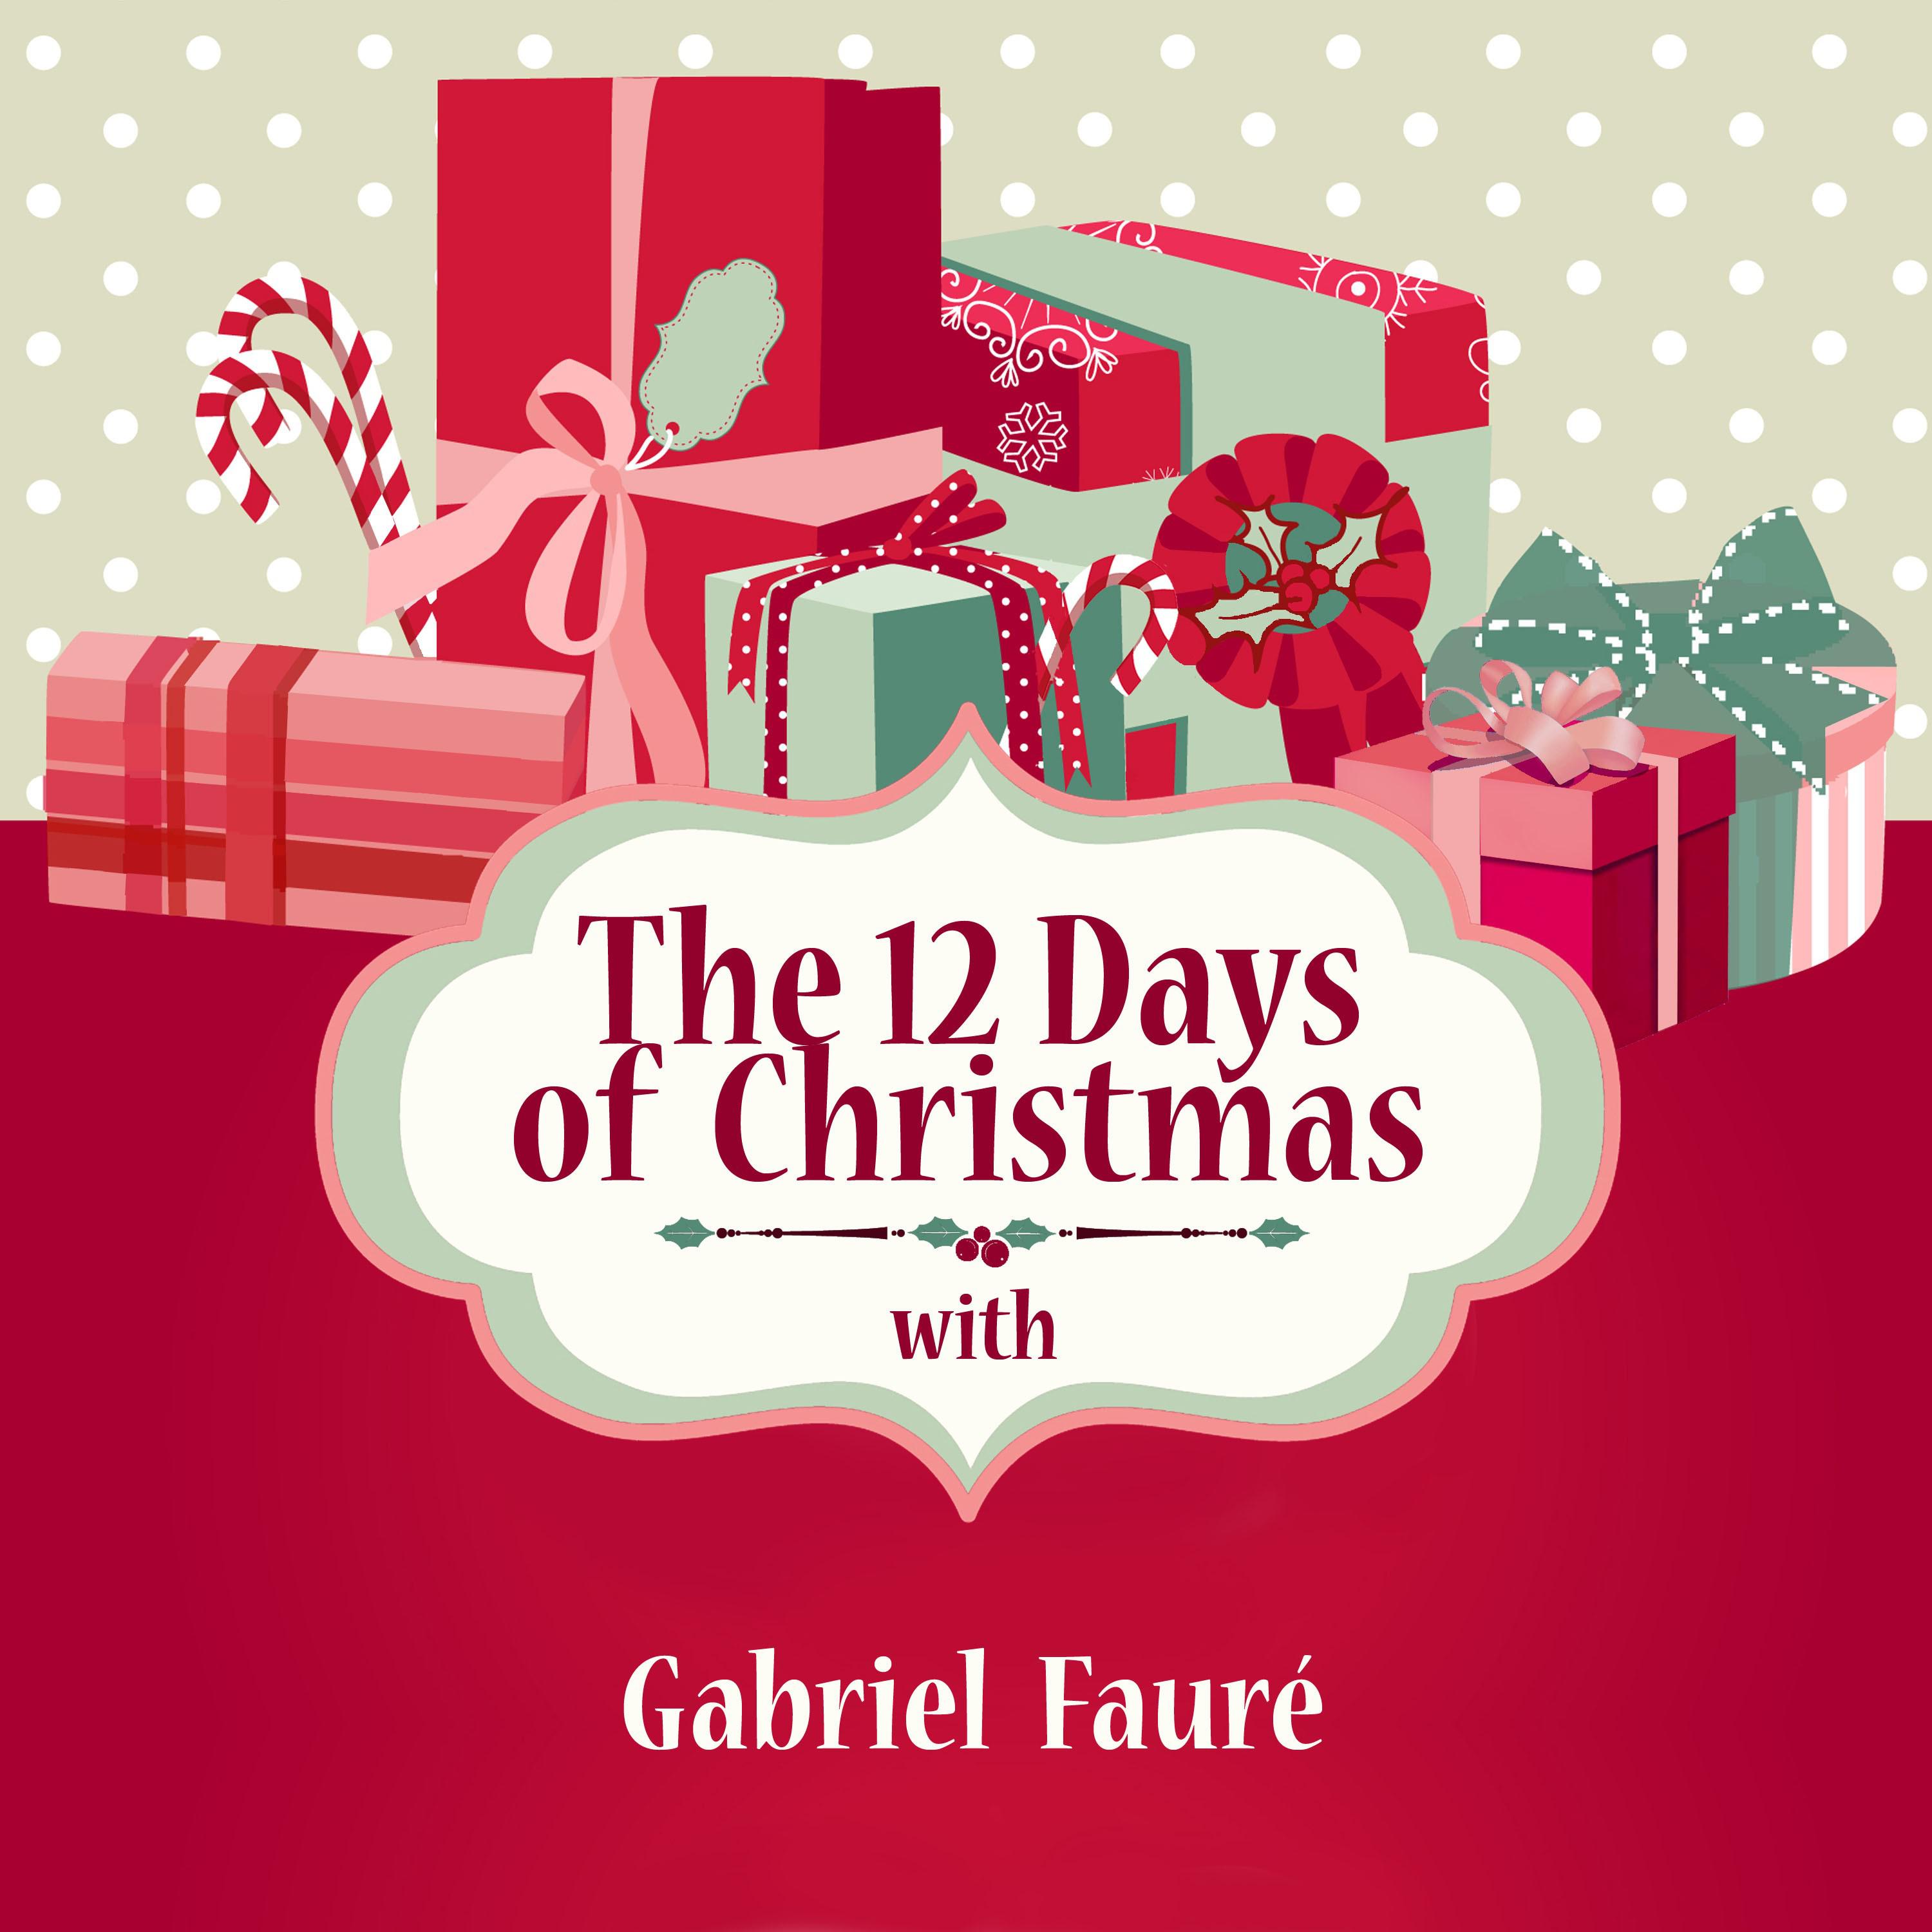 The 12 Days of Christmas with Gabriel Fauré